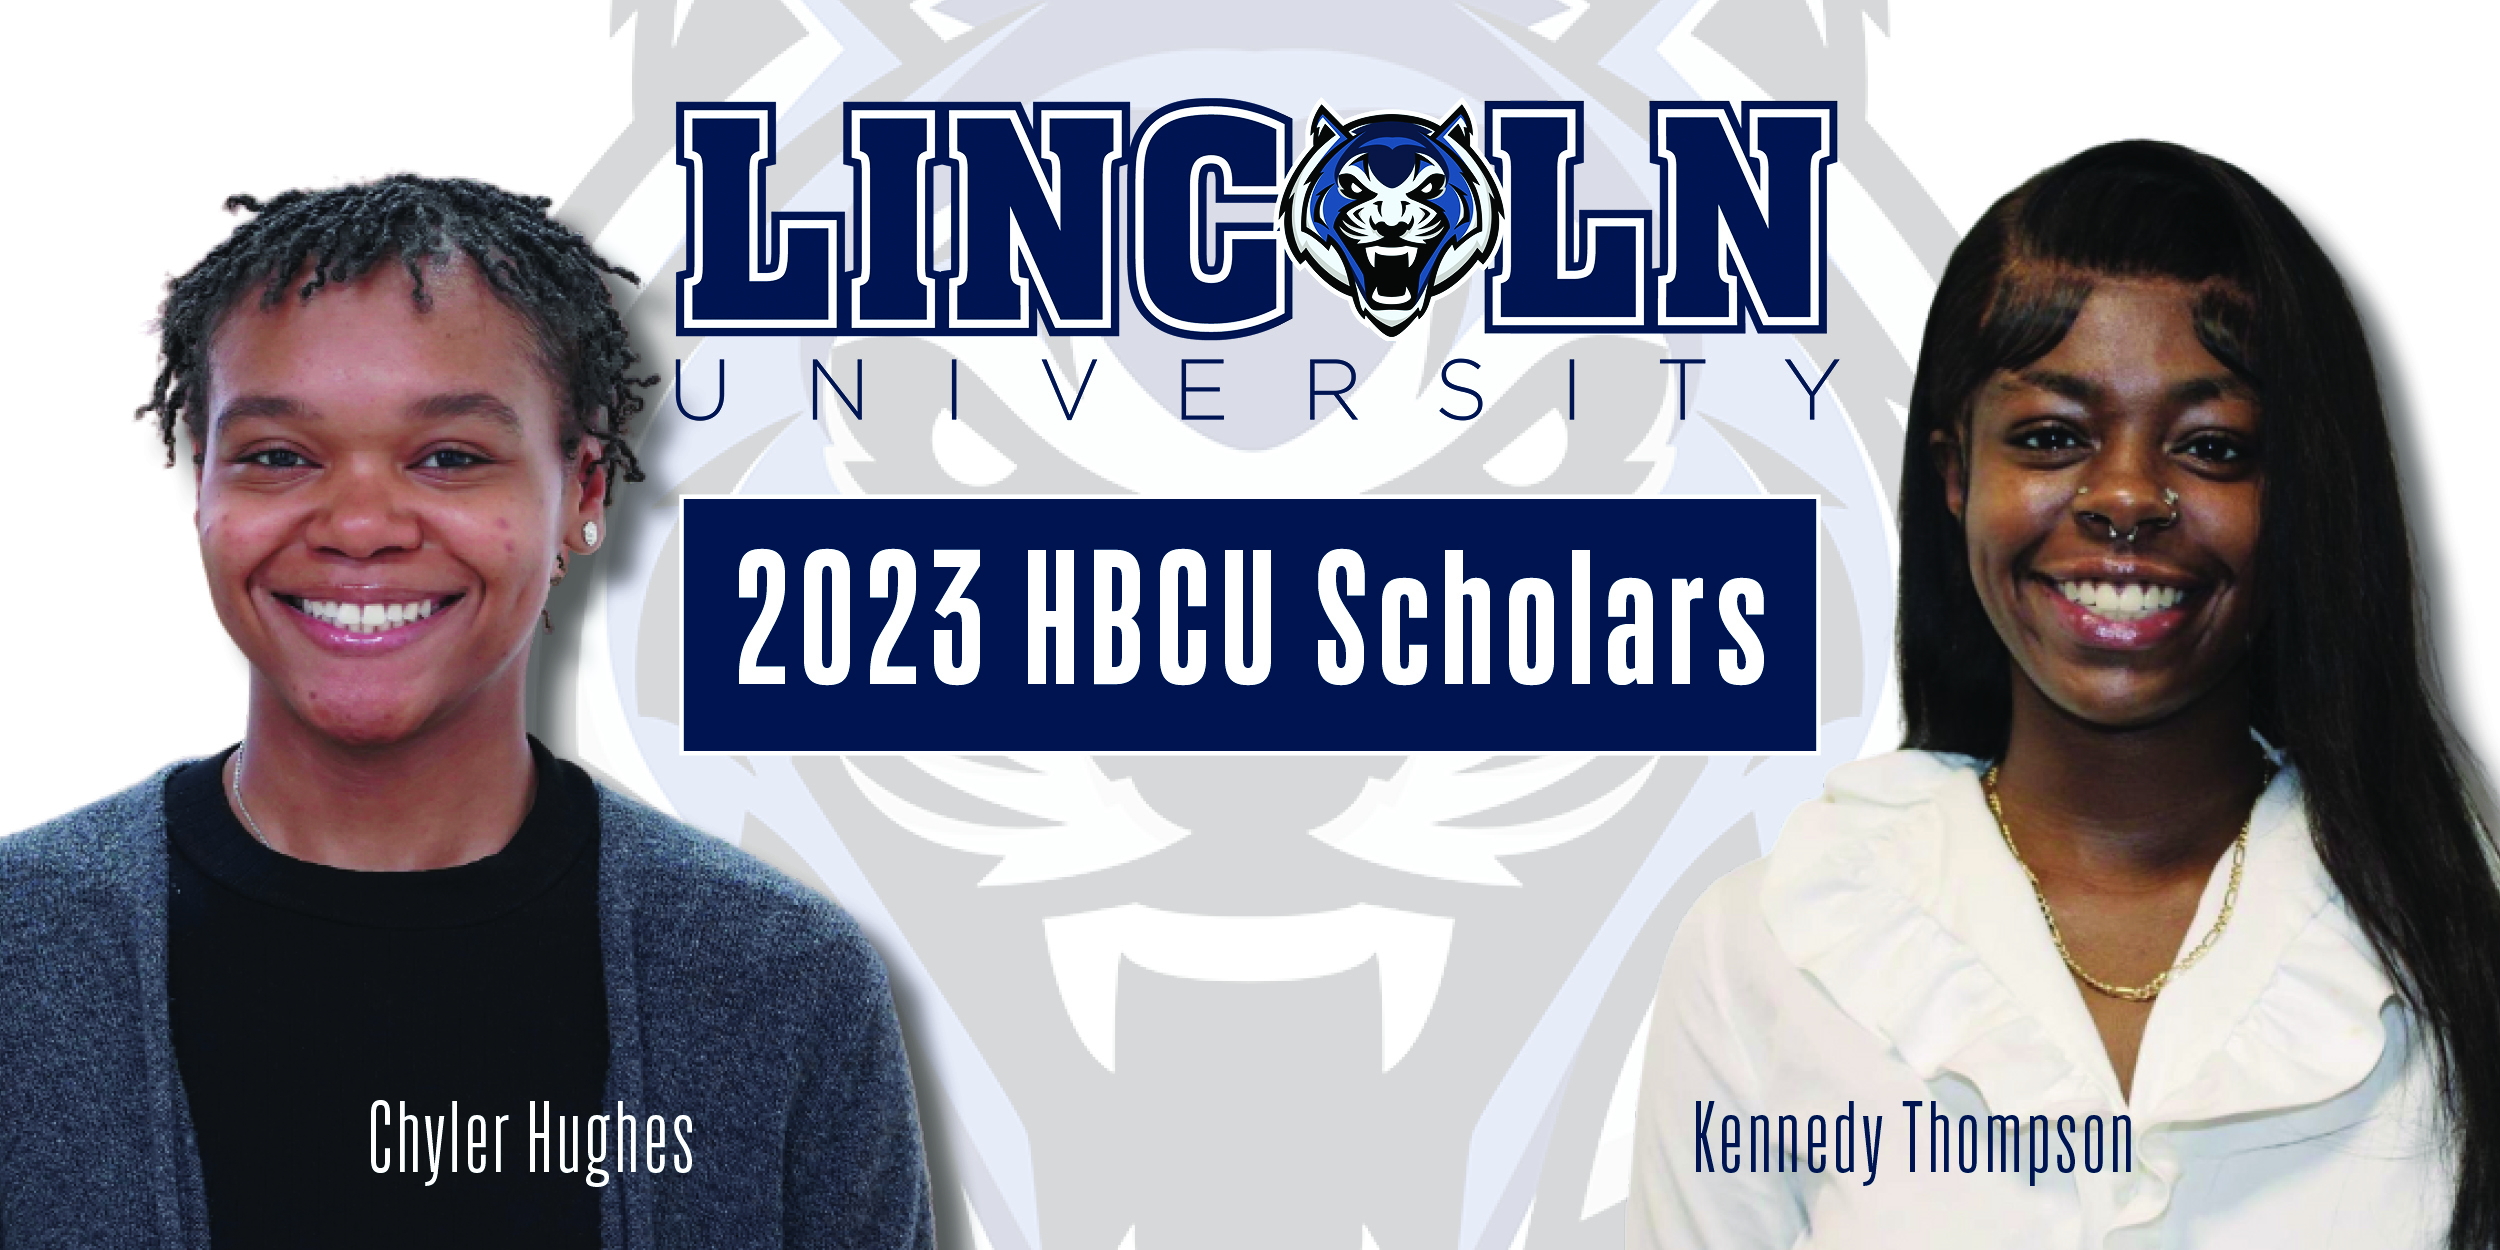 LU seniors Chyler Hughes and Kennedy Thompson will serve as student ambassadors, attending workshops and master classes to enhance their leadership skills and professional development as part of the 2023 HBCU Scholar Recognition Program.